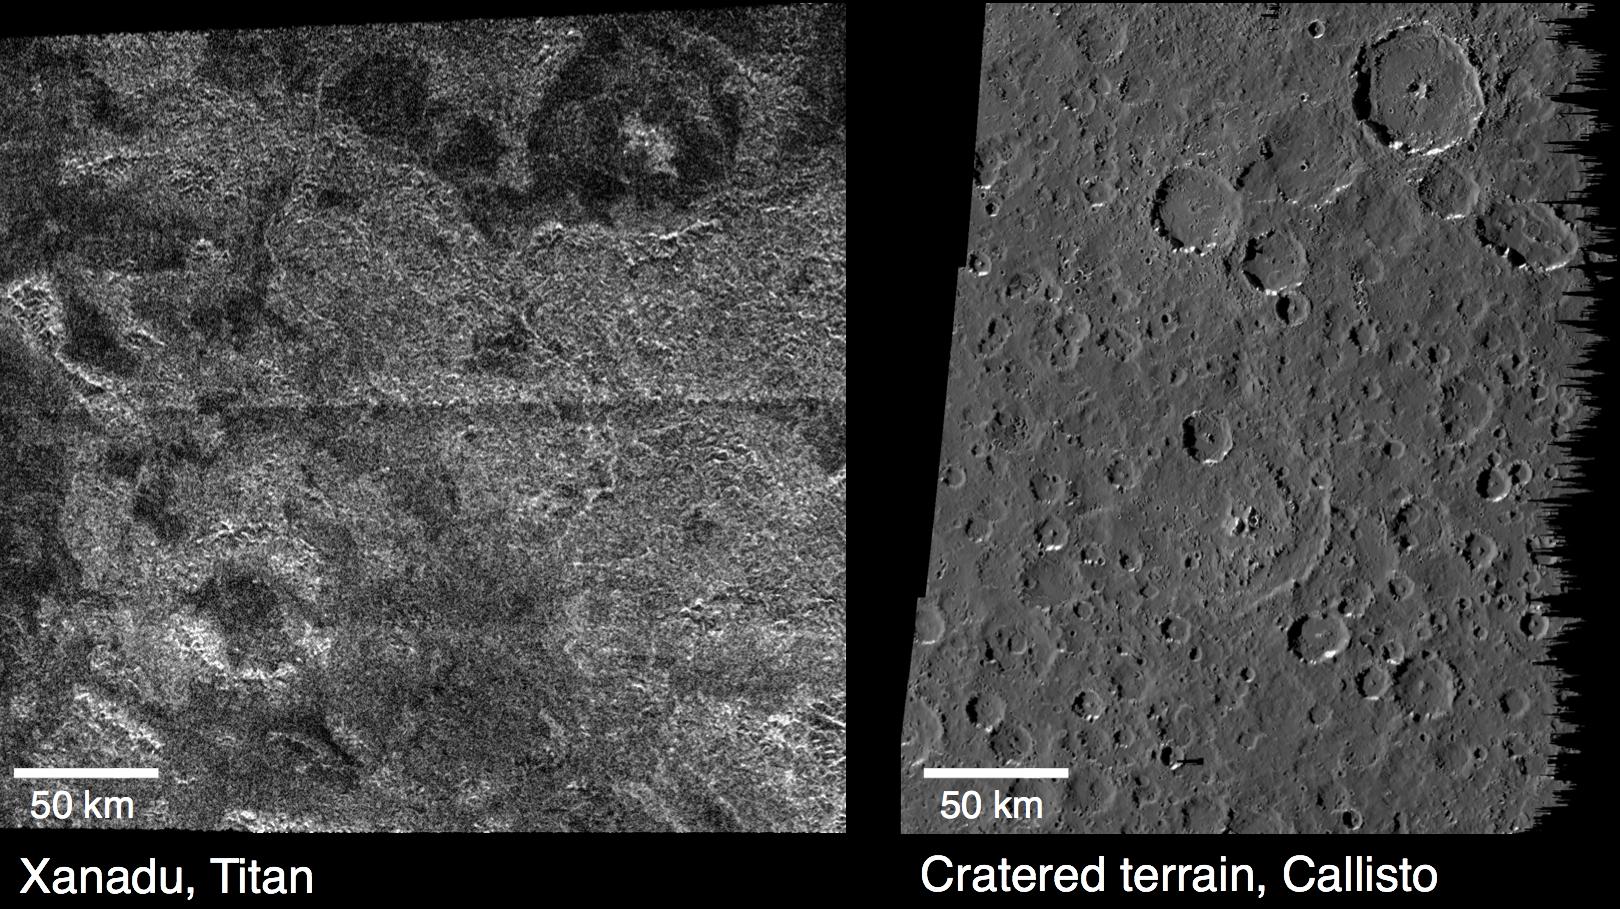 These images compare surface features observed by NASA's Cassini at the Xanadu region (left), and features observed by NASA's Galileo on Jupiter's moon Callisto (right).